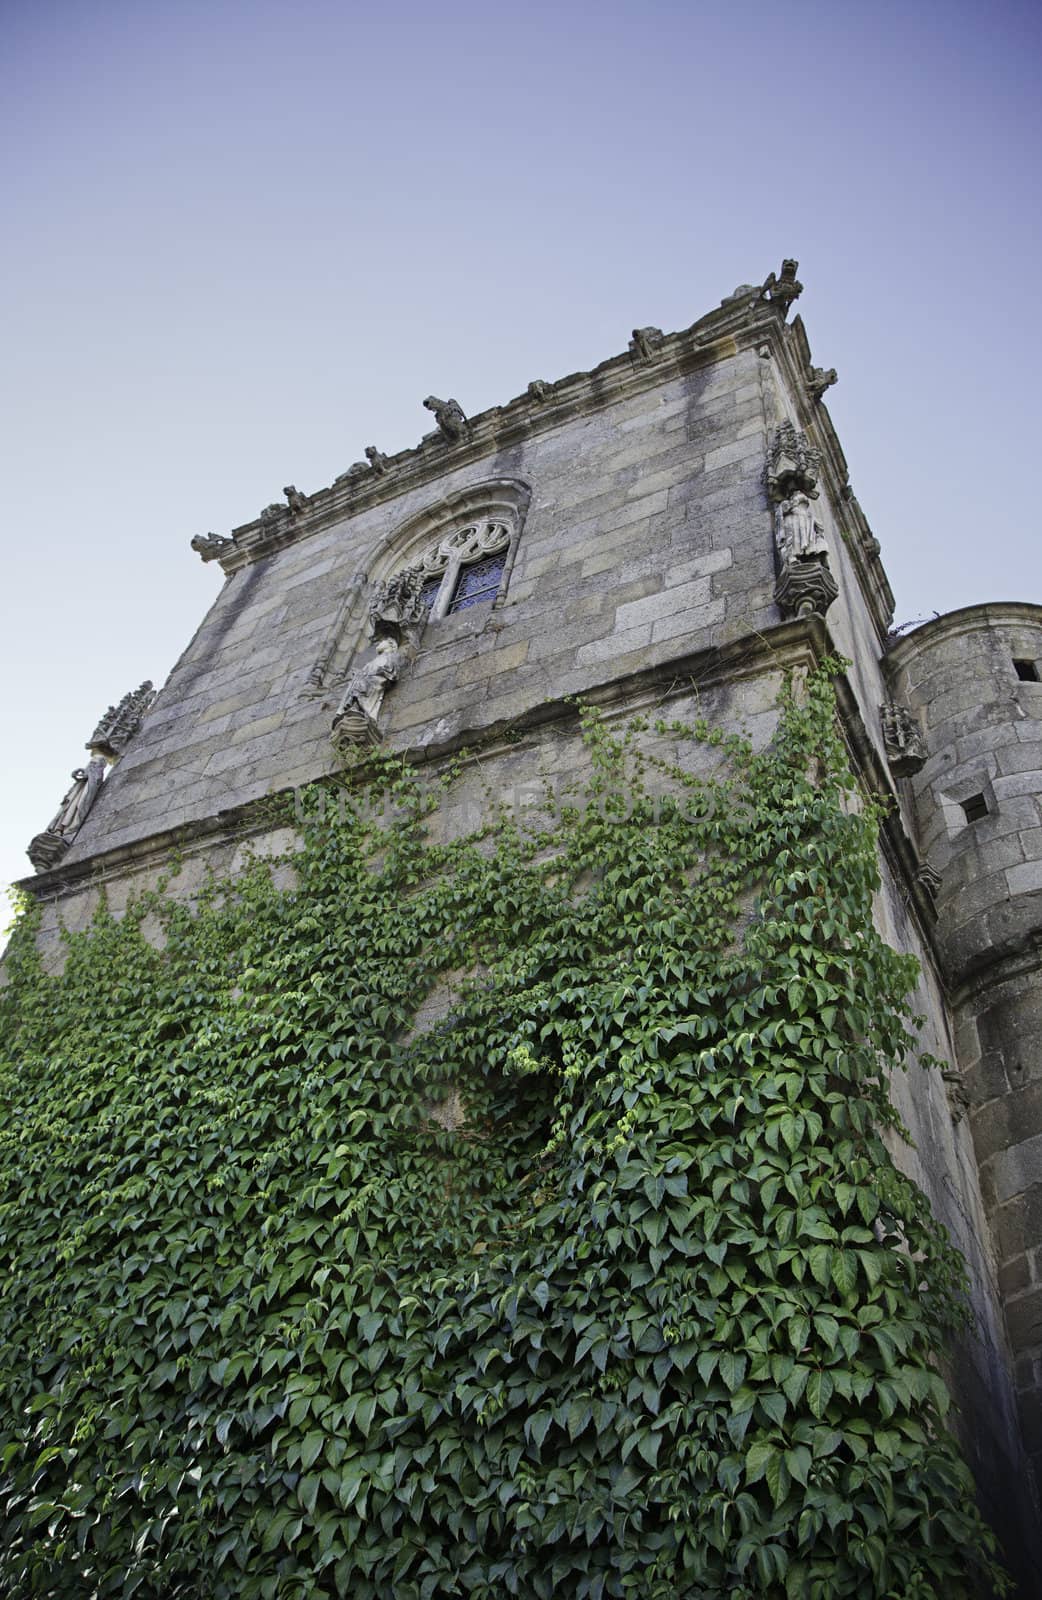 Old castle in Portugal, detail of a ruin with plants